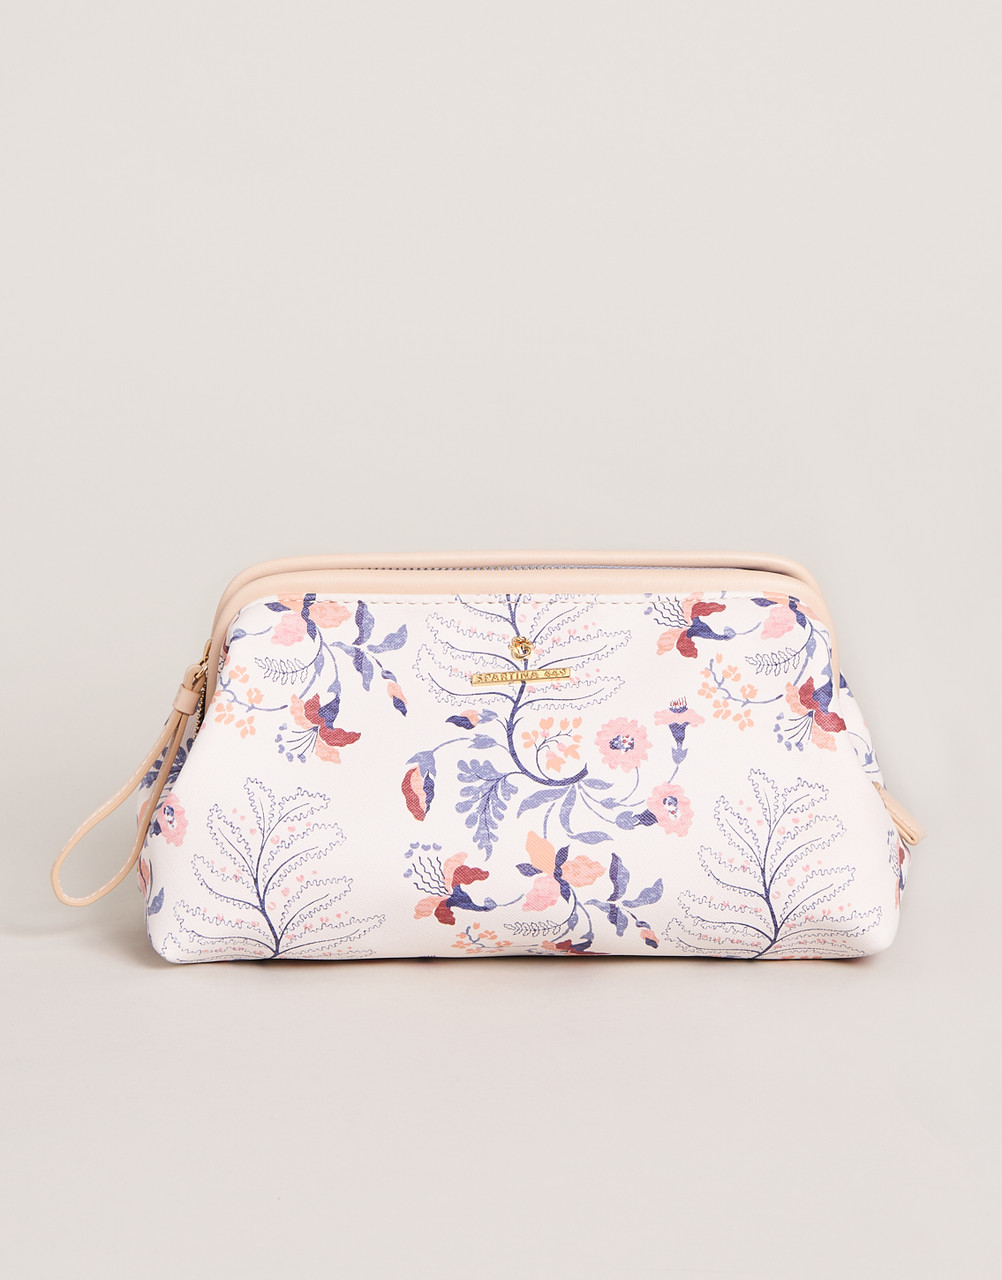  A small toiletry bag with a beautiful floral pattern in shades of pinks and blues